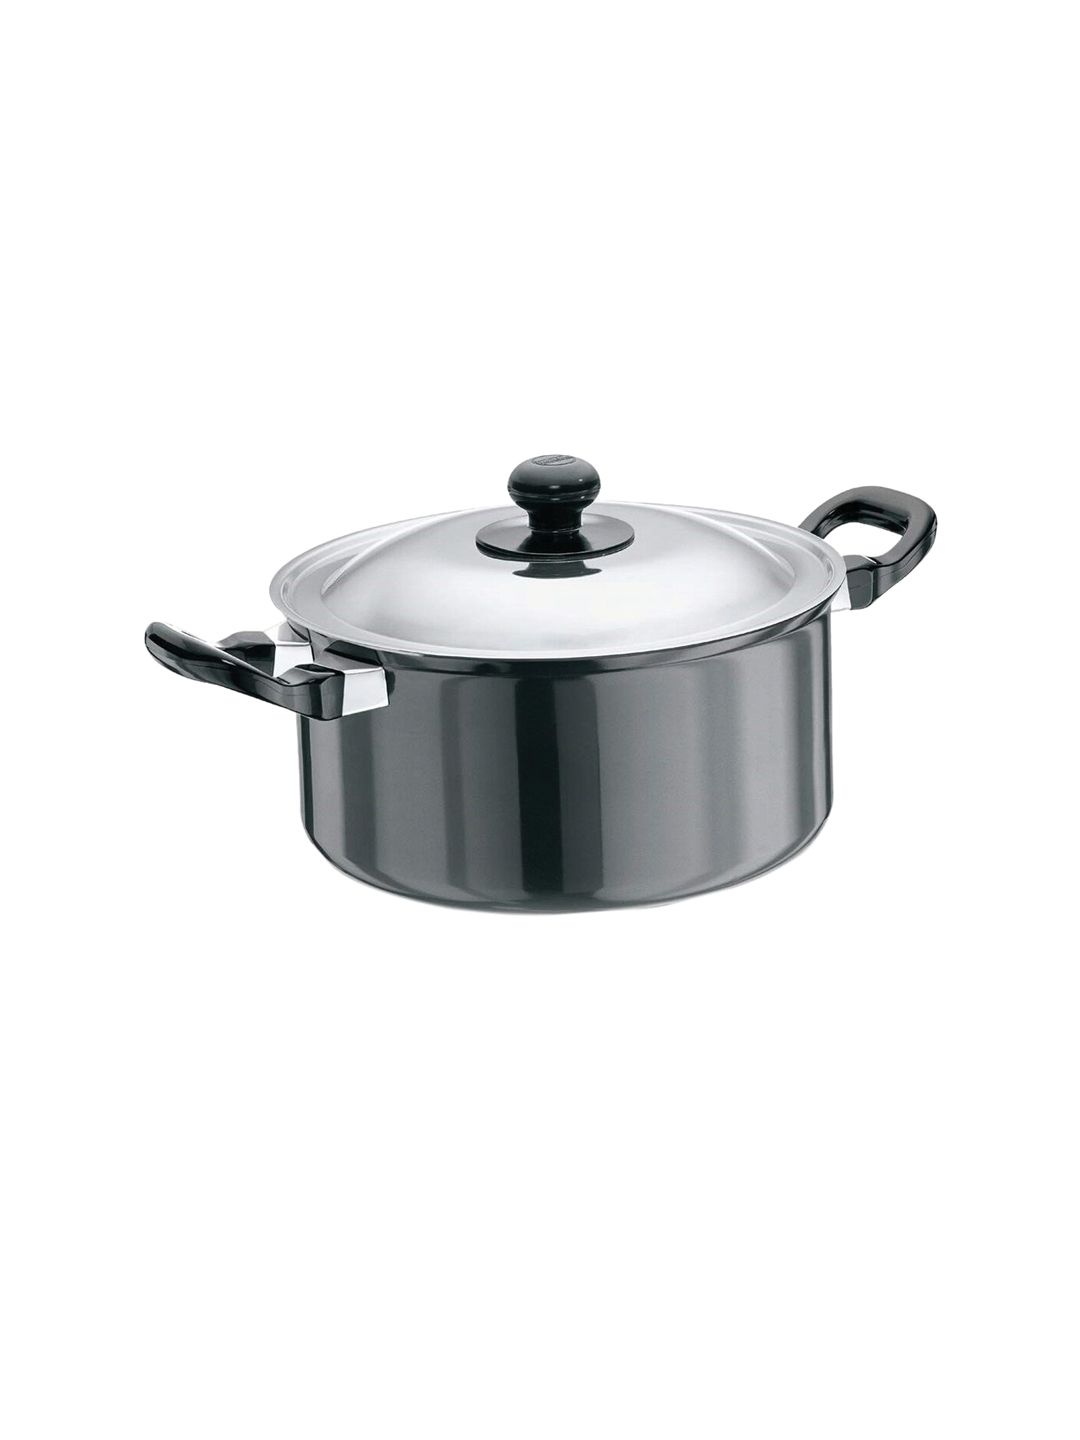 Hawkins Unisex Black Futura Nonstick Cook-n-Serve Stewpot with Stainless Steel Lid Price in India